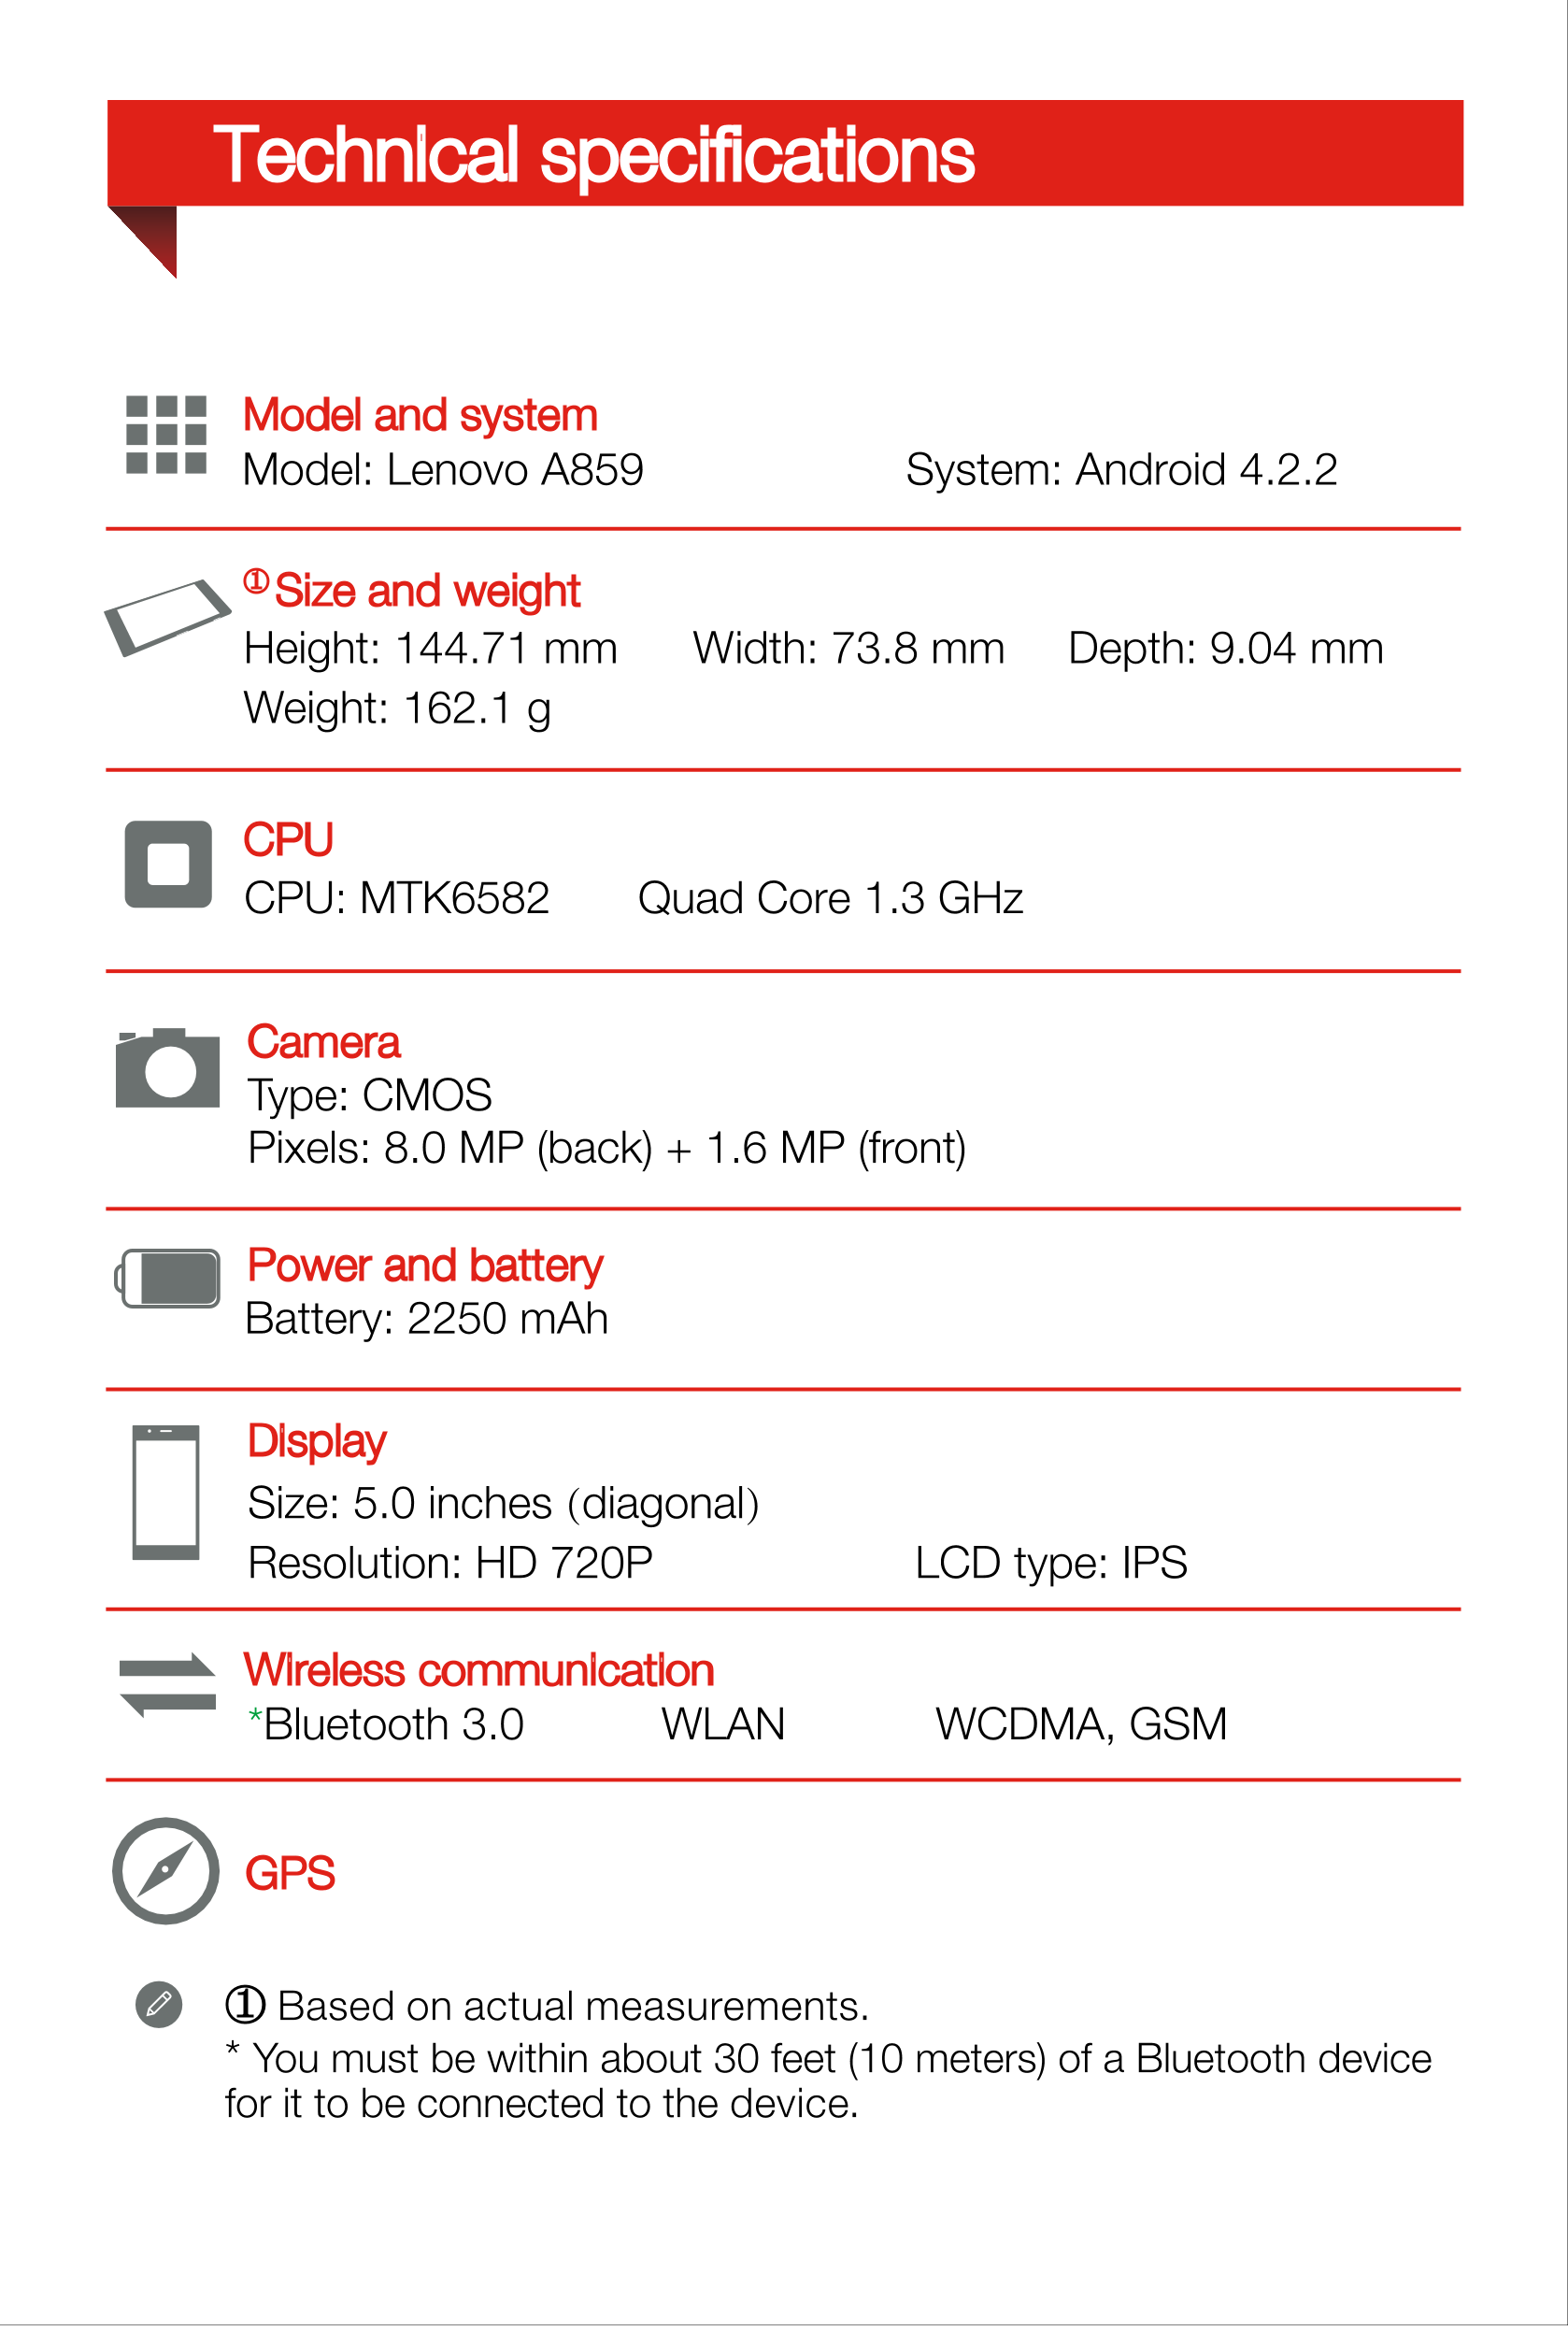 Technical speciﬁcations
Model and system
Model: Lenovo A859 System: Android 4.2.2
 Size and weight
Height: 144.71 mm      Width